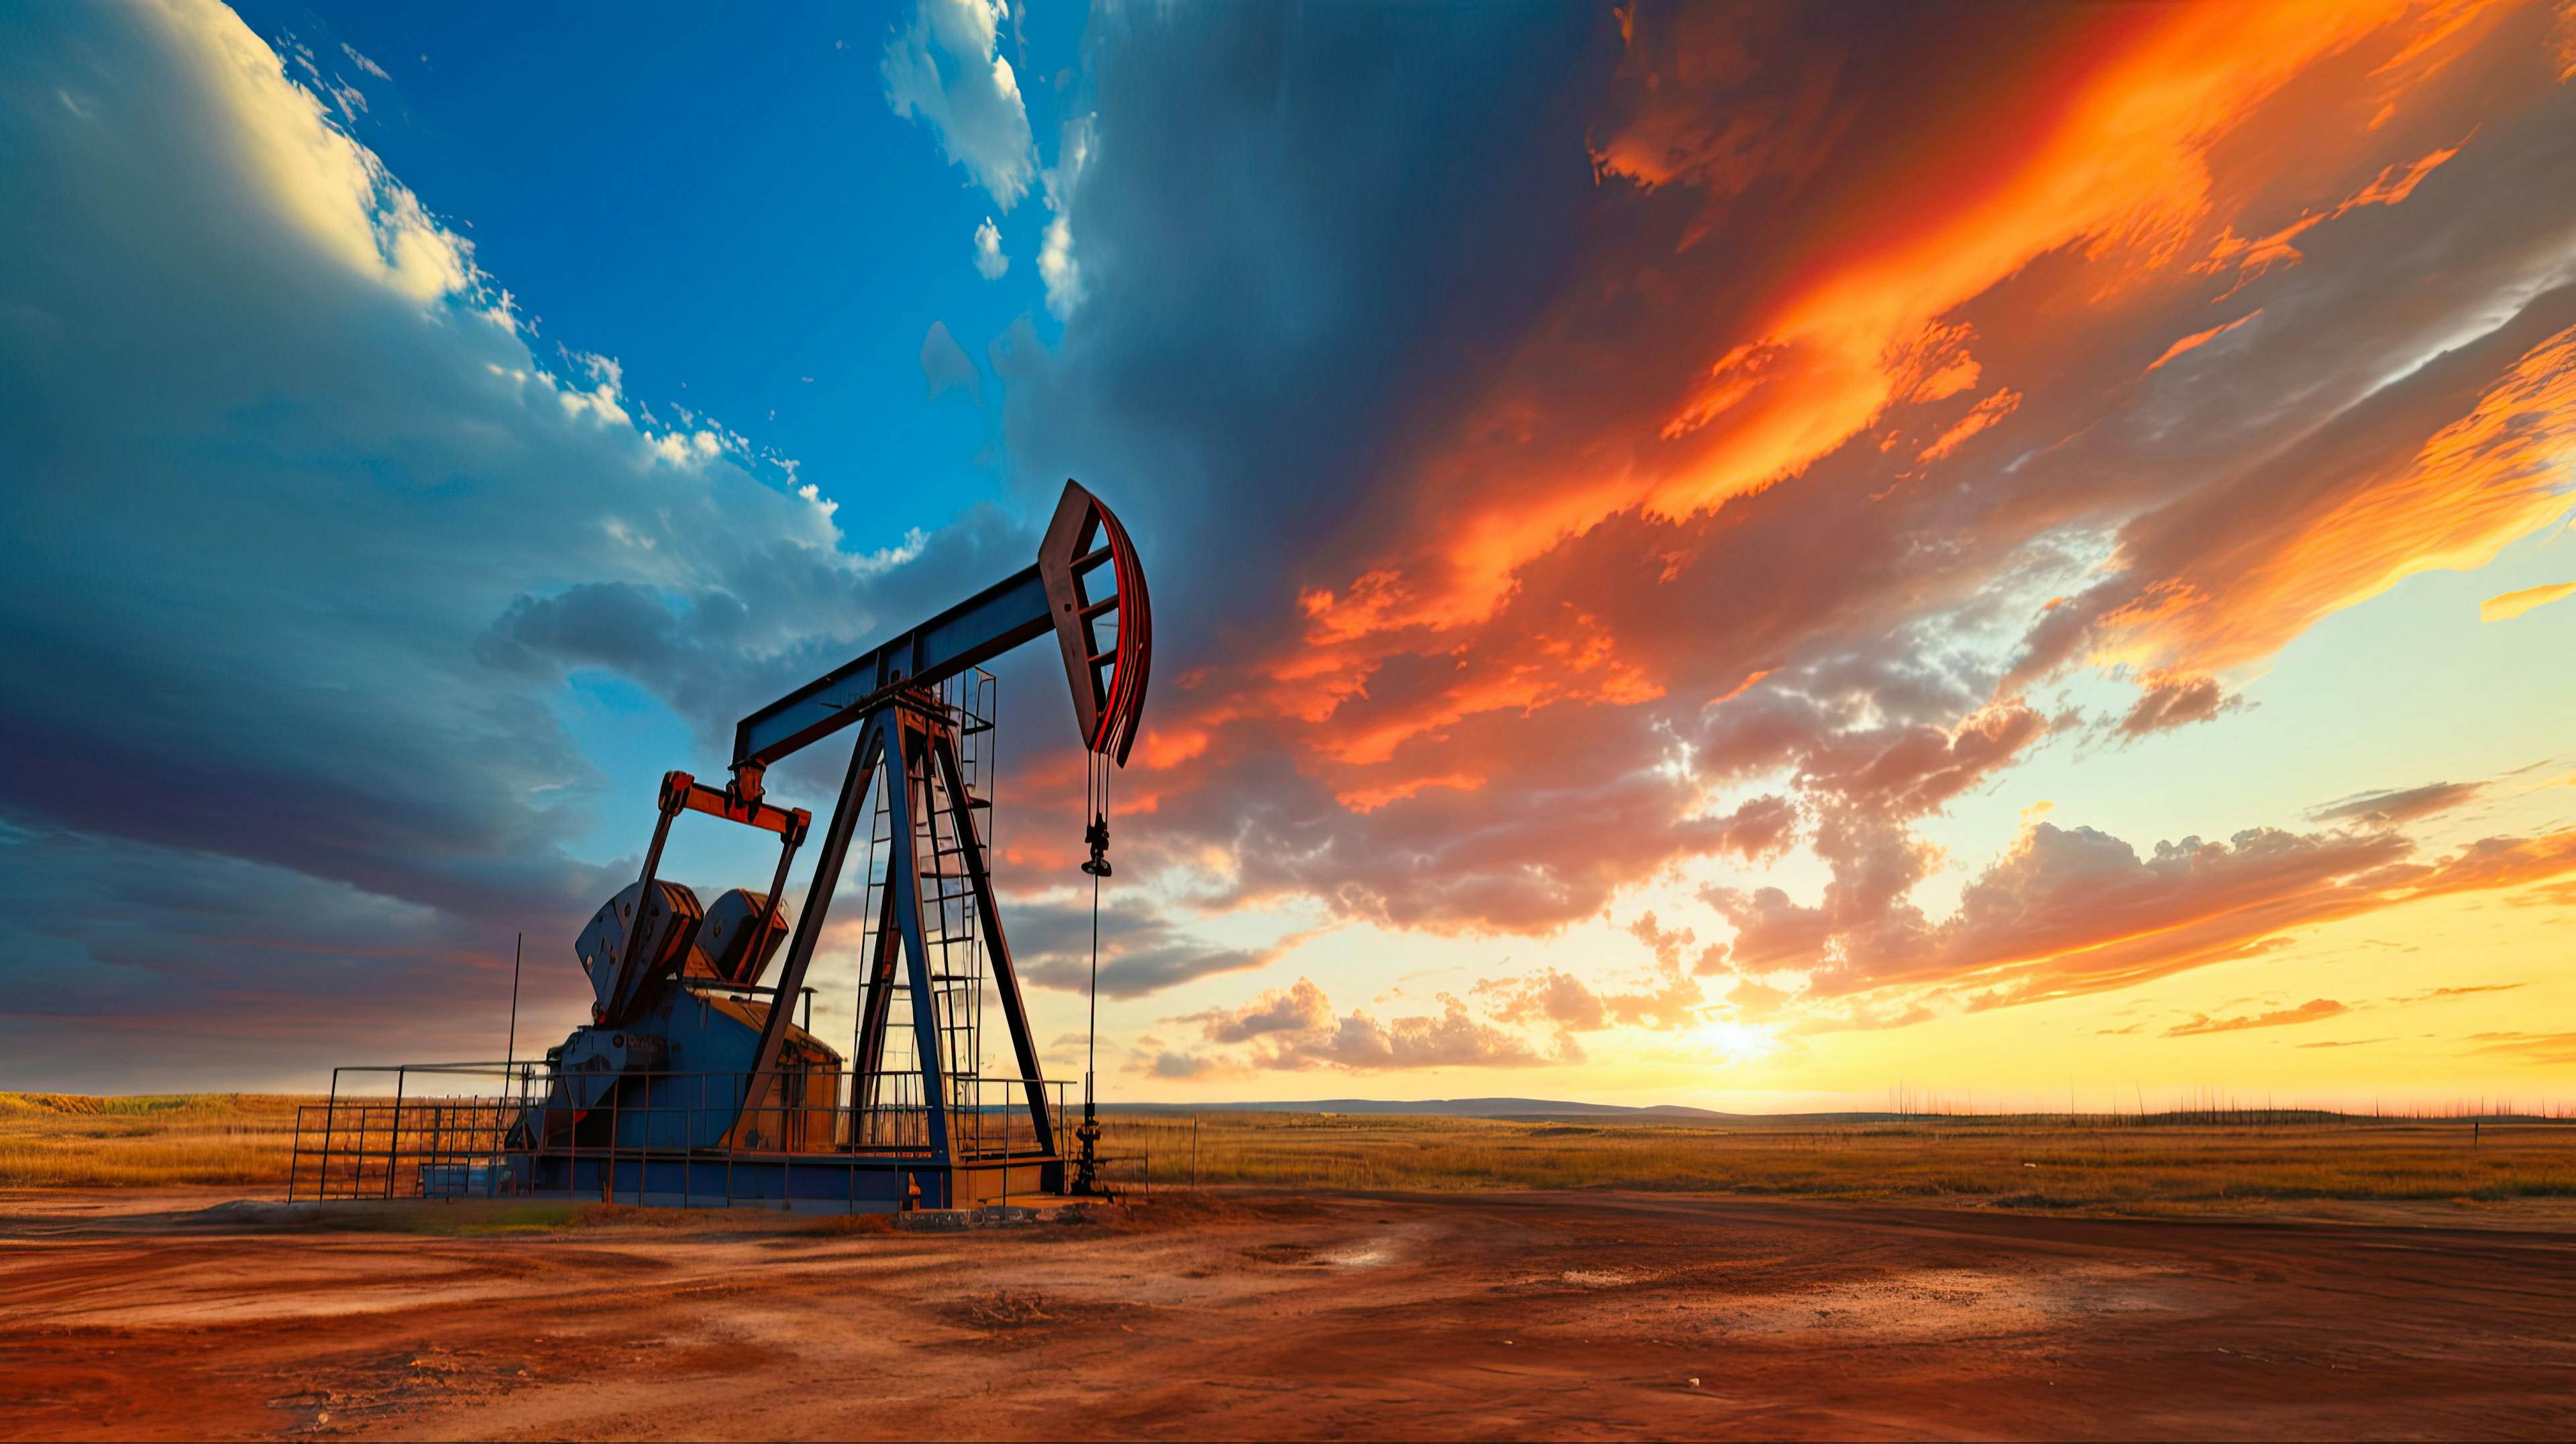 Oil and Gas Drilling: Equipment on Onshore Desert Rig. Powering the Energy Industry with Shale and Gas Wells Amidst Dramatic Cloudscape. Generative AI | Image Credit: © AIGen - stock.adobe.com